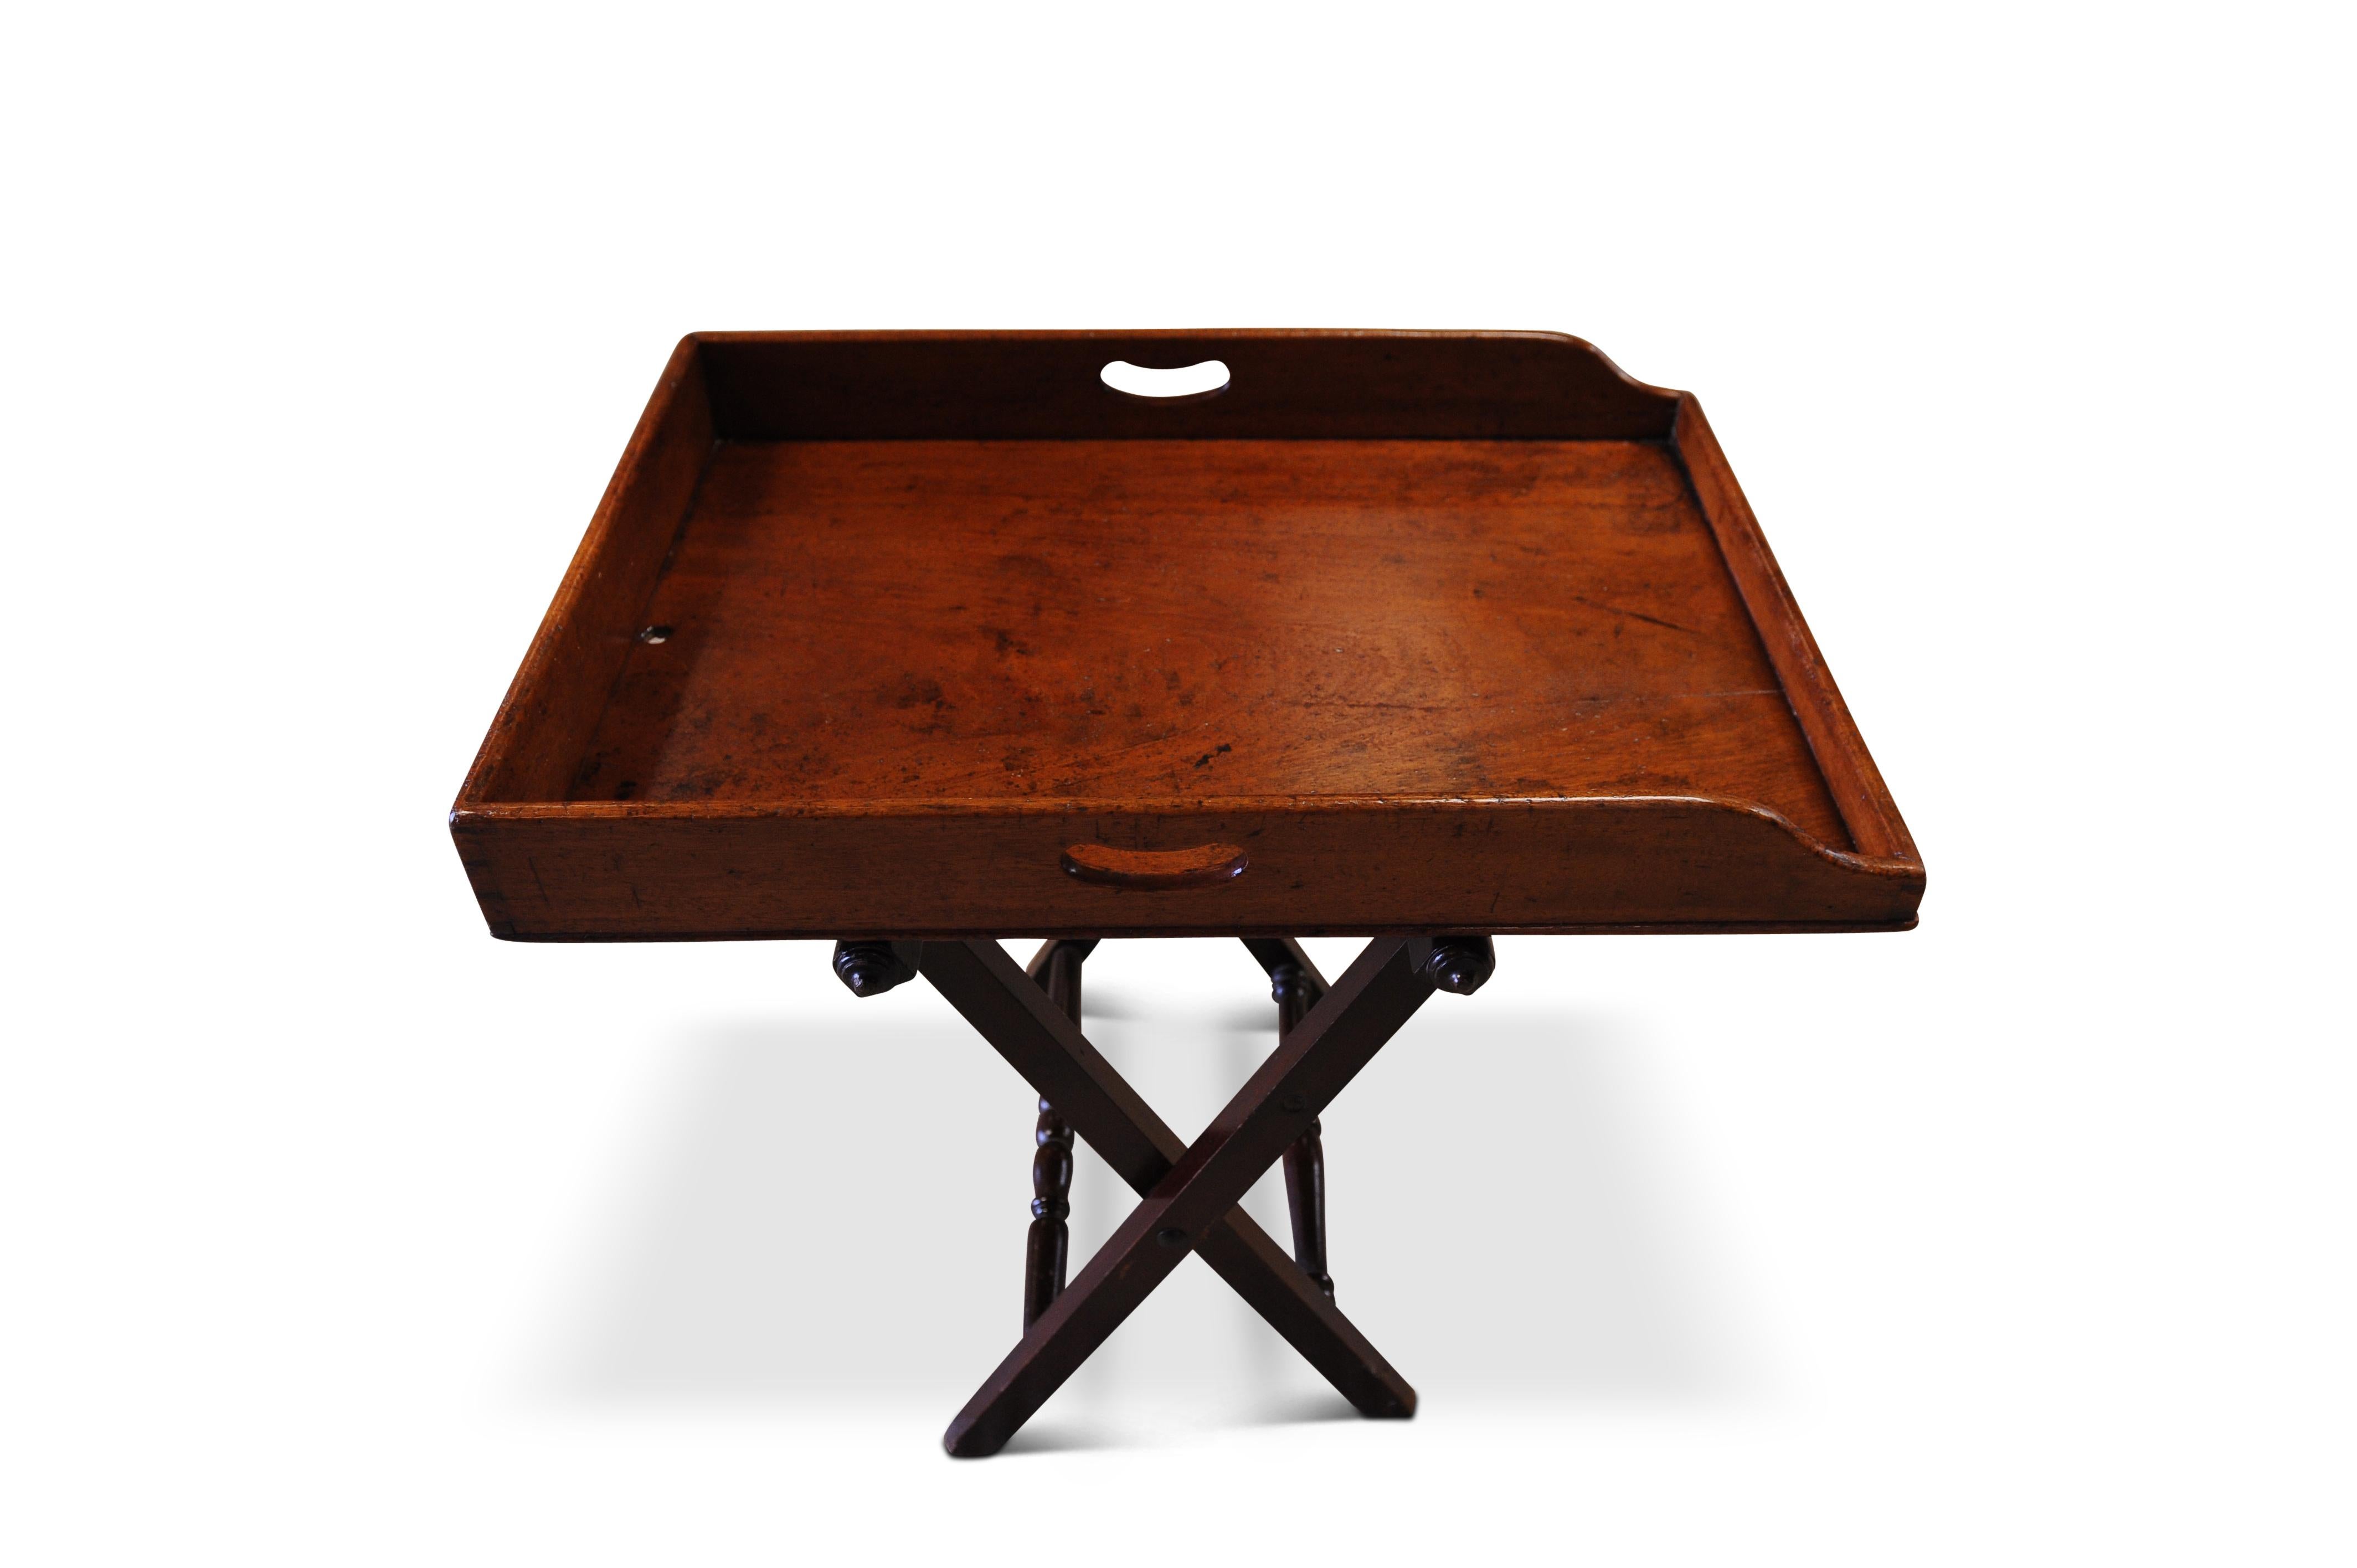 Late 19th century mahogany butlers tray with folding stand and removable tray

- Tray lifts off - ideal for carrying drinks
- Wonderful tray for drinks or collectables in any modern or travel inspired setting
- Beautiful handmade dovetails (as